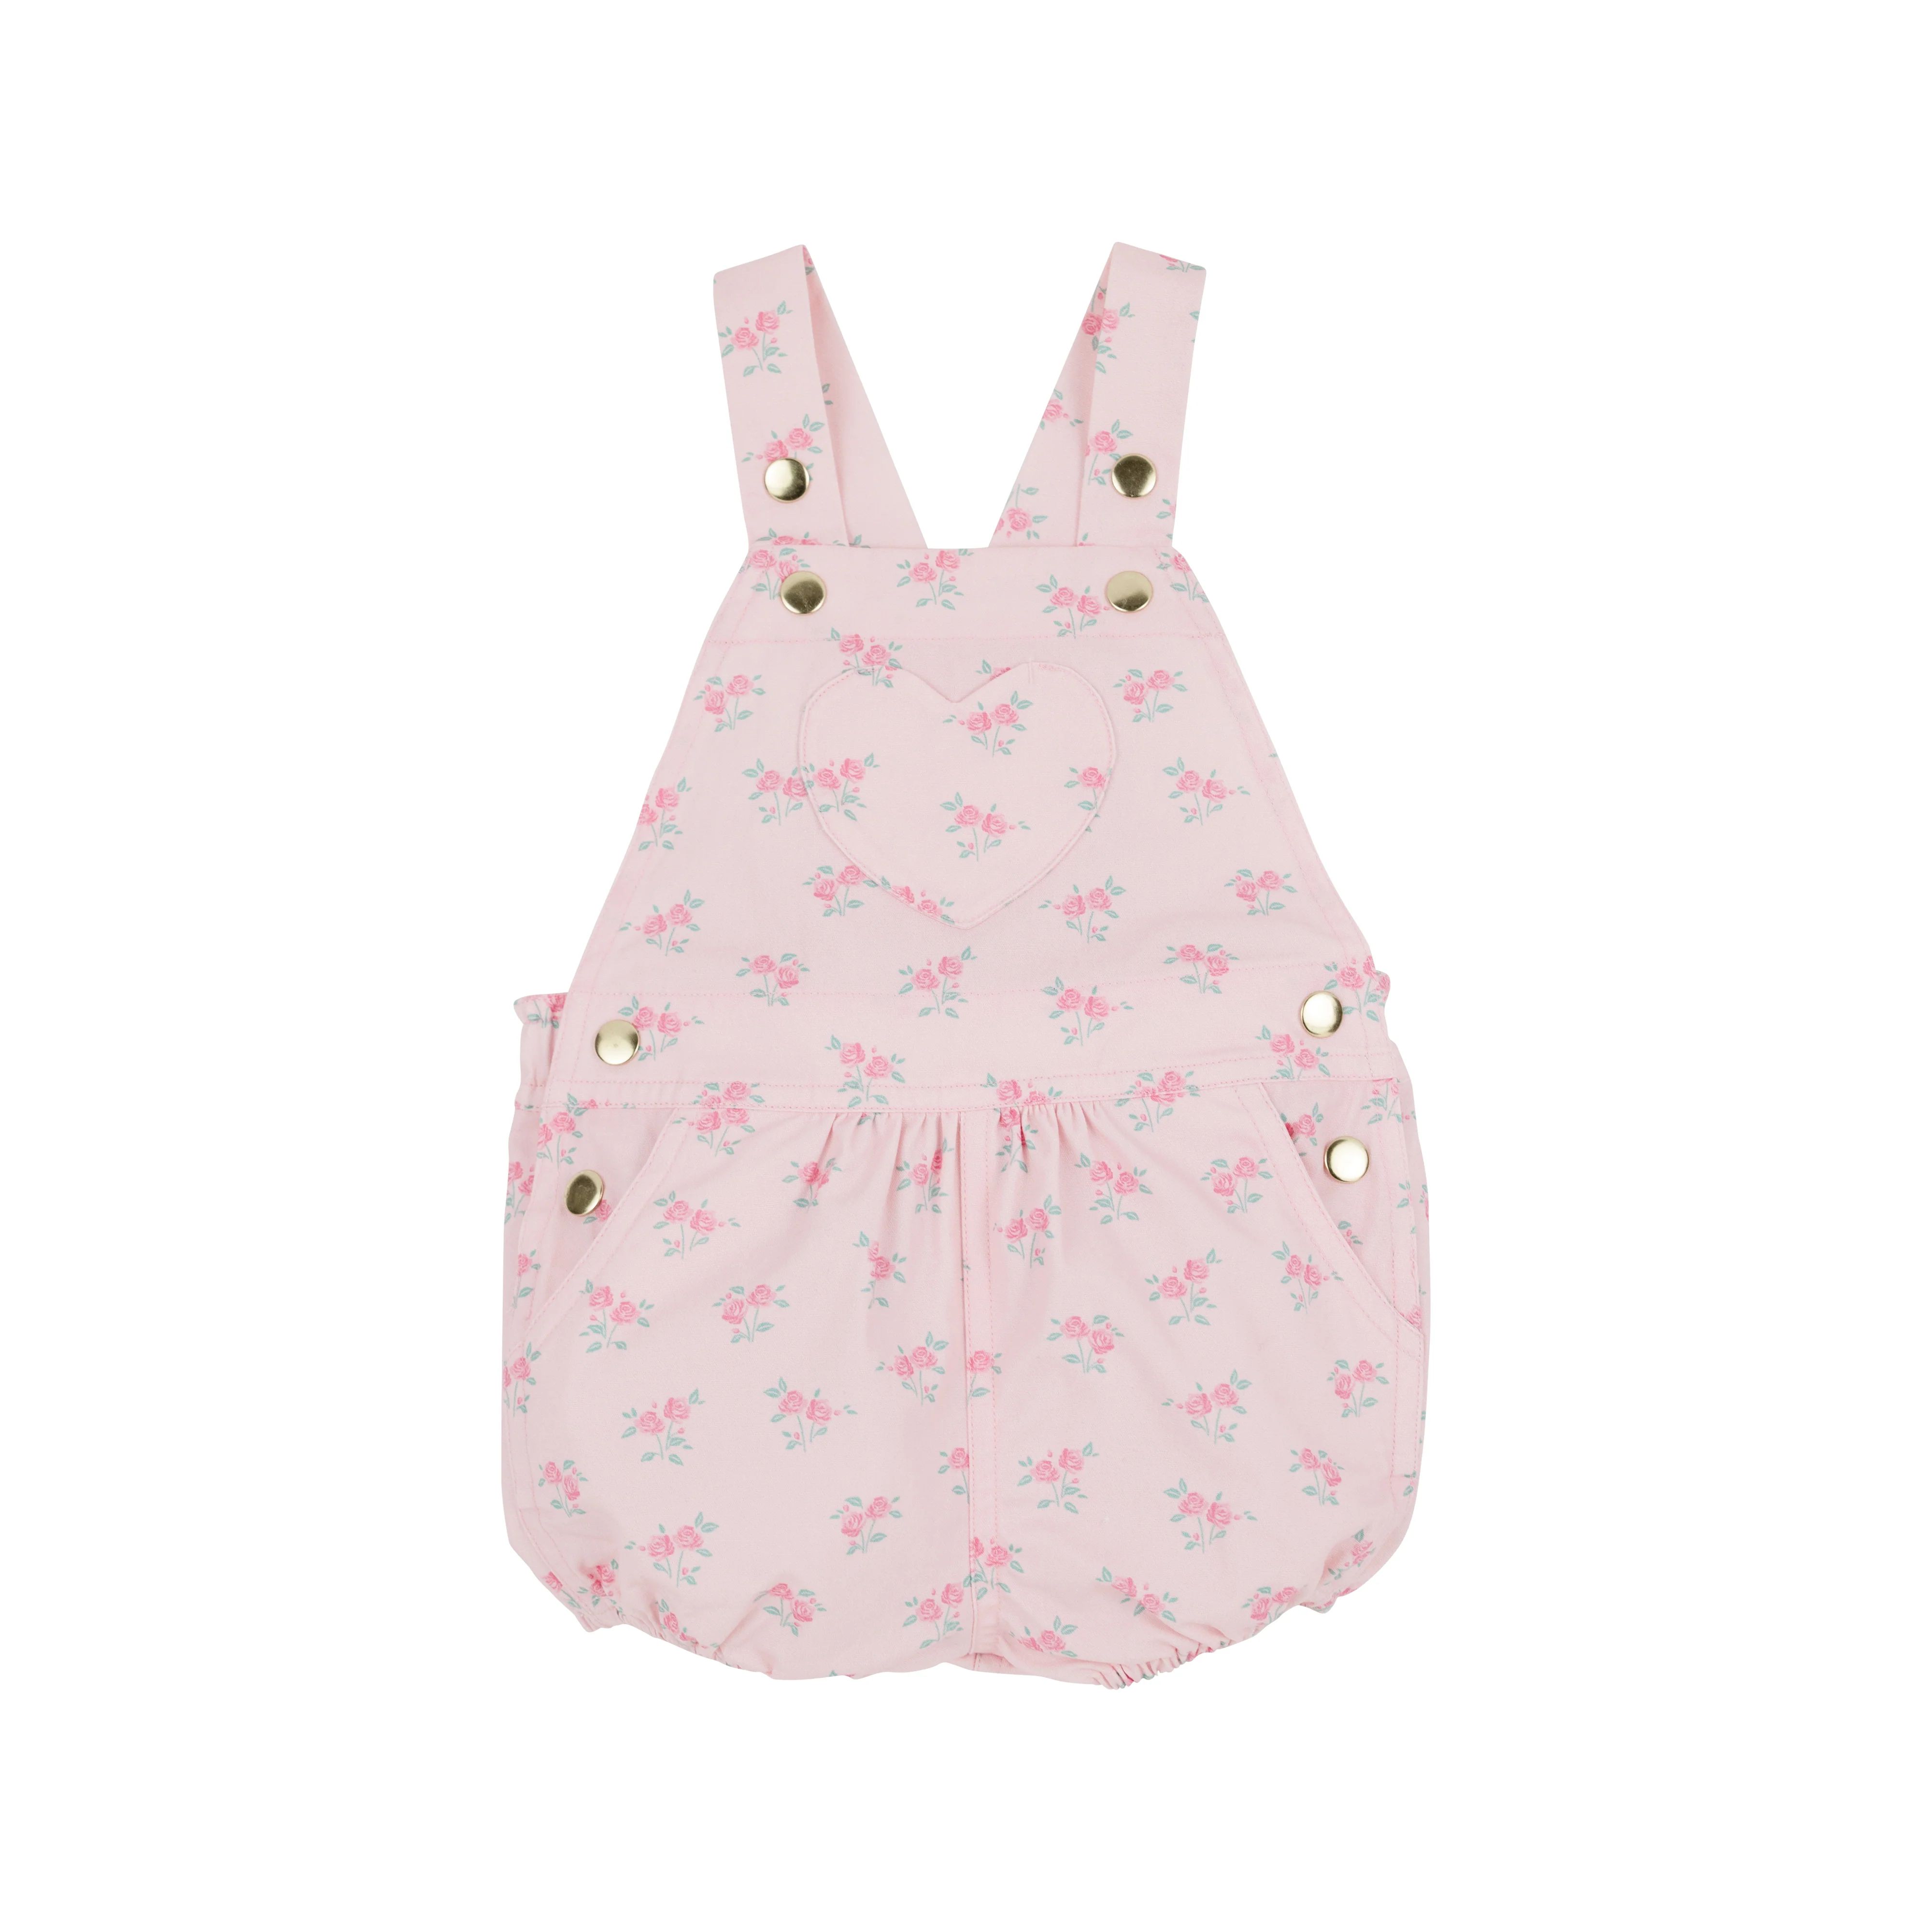 Channing Choo Choo Overalls (Bloomers) - Best Buds | The Beaufort Bonnet Company